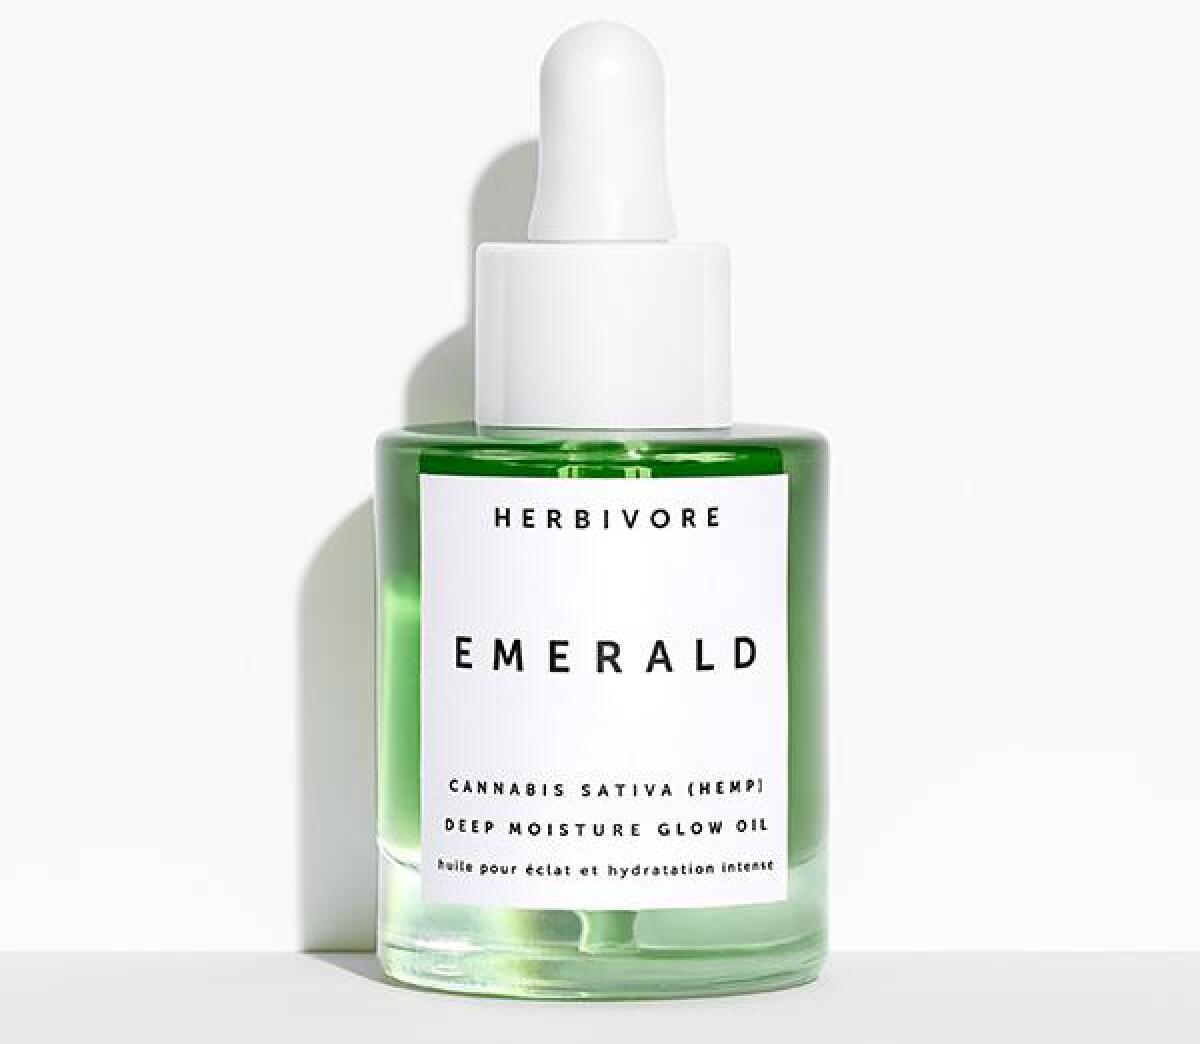 Herbivore's Emerald Deep Moister Glow oil at Pigment stores in San Diego.